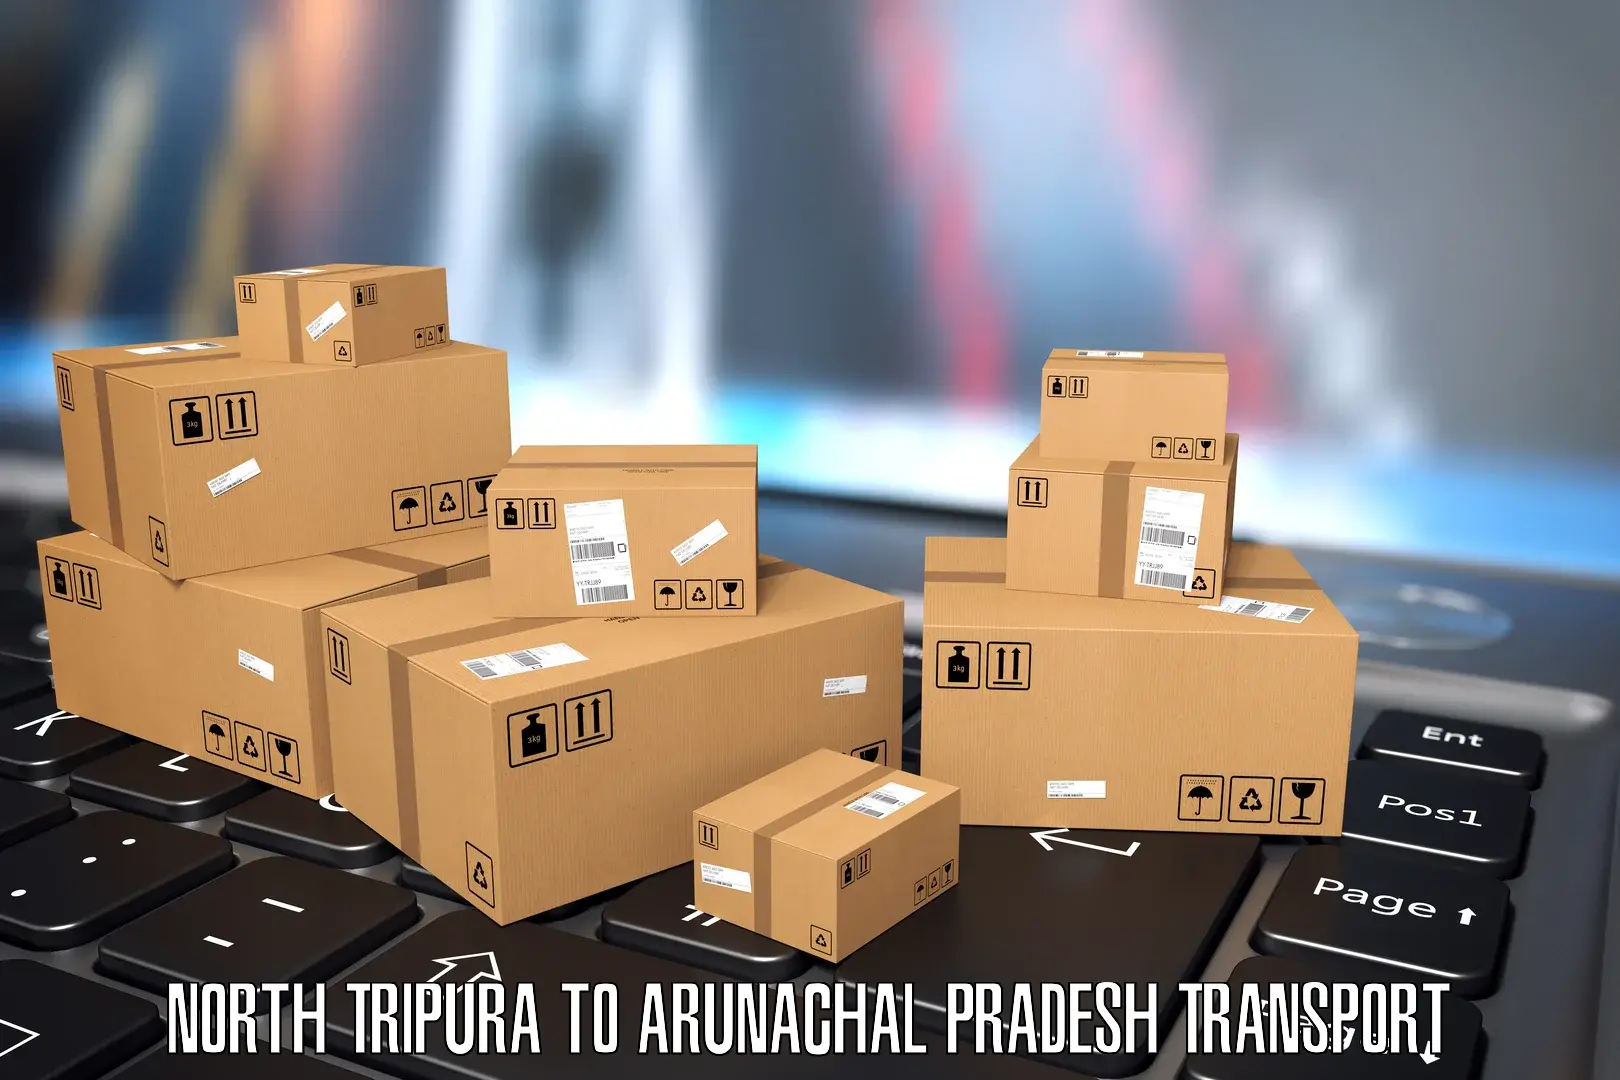 Container transport service North Tripura to Khonsa